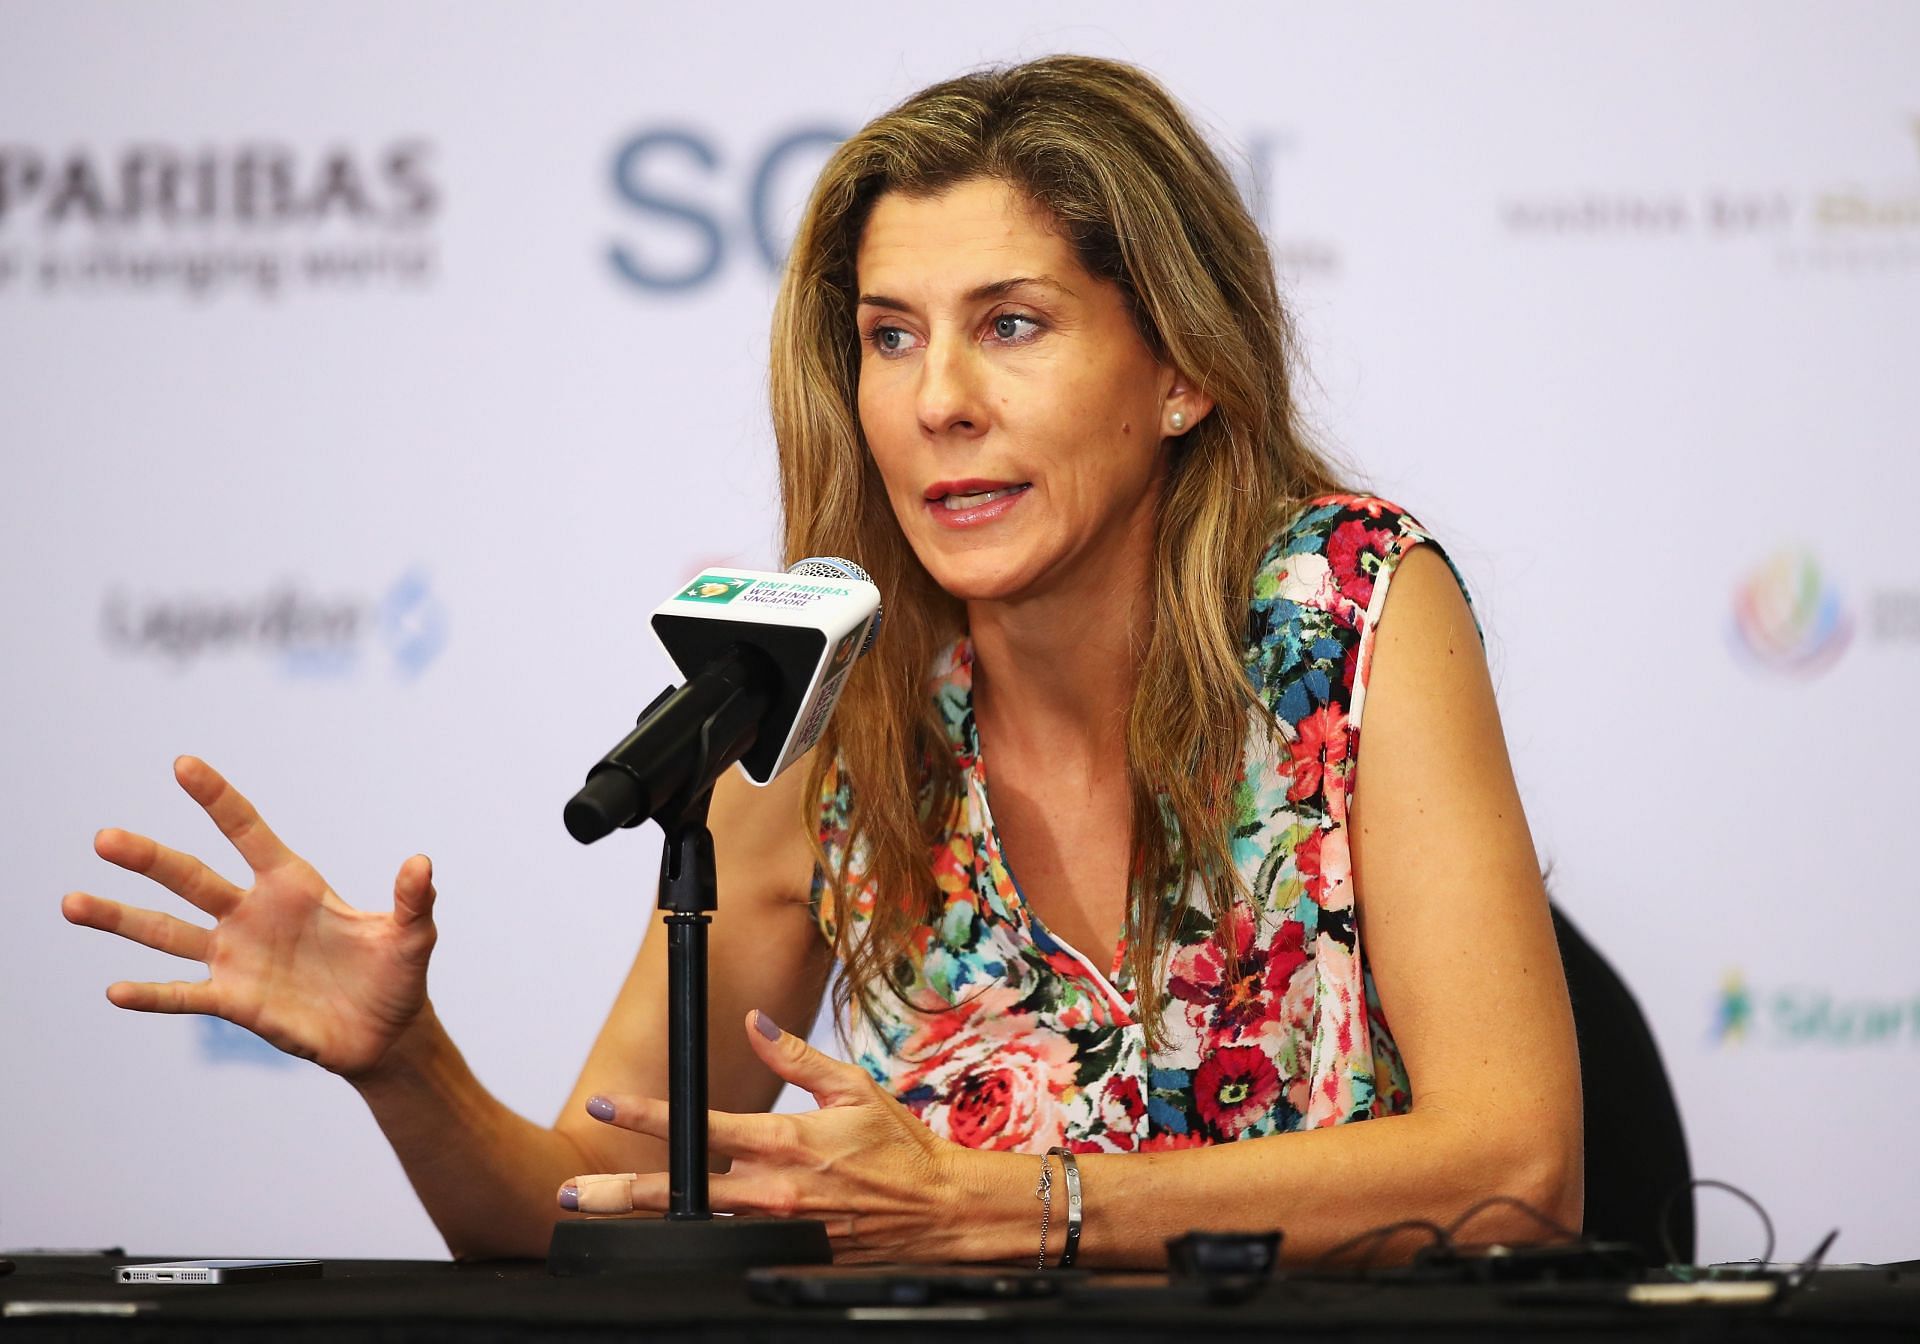 Monica Seles returned to the tour in 1995